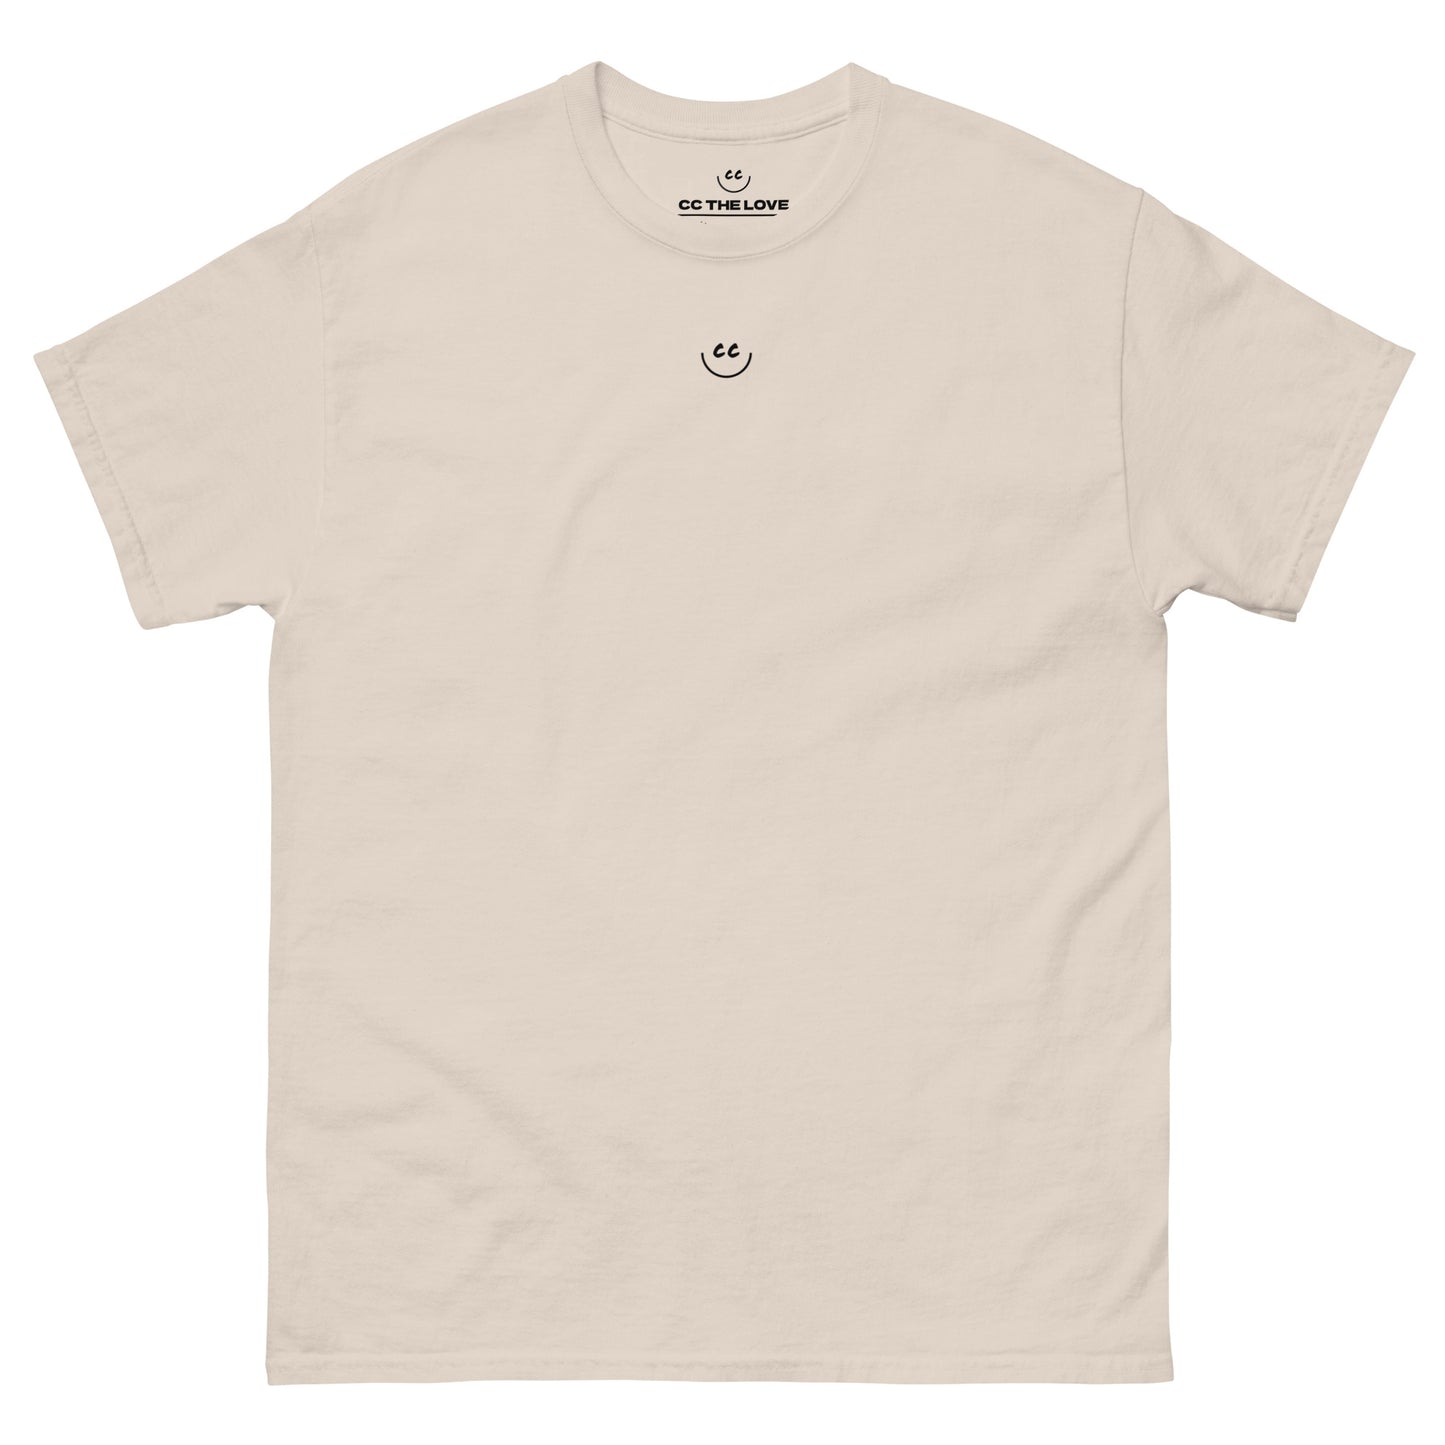 Little Smile Tee in Natural - Short Sleeve